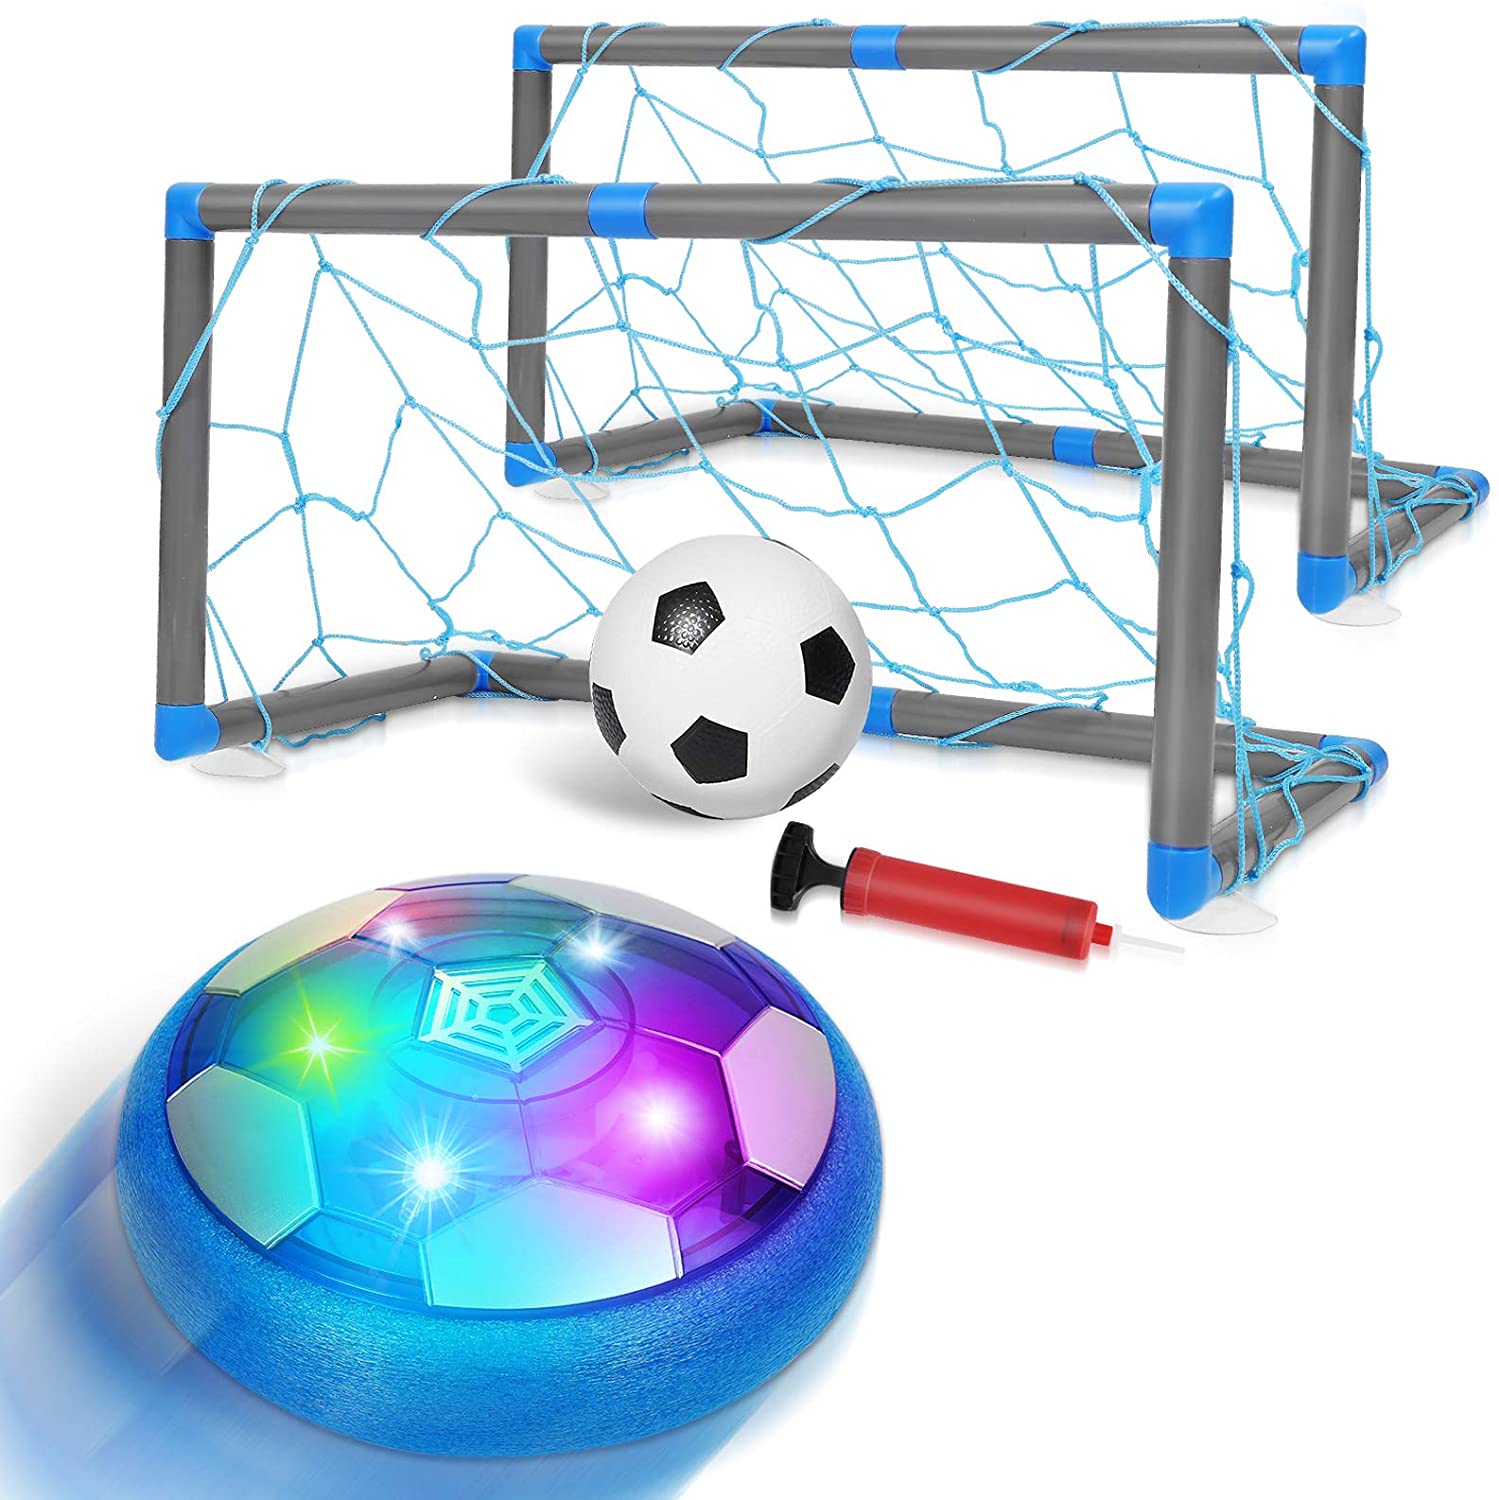 Kids Toys Rechargeable Air Soccer with LED Light and Foam Bumper Indoor Projector Floating Ball Games Gift for 3 4 5 6 Years Old Boy Girl Toddler（Newest Version） Hover Soccer Ball Set with 2 Goals 